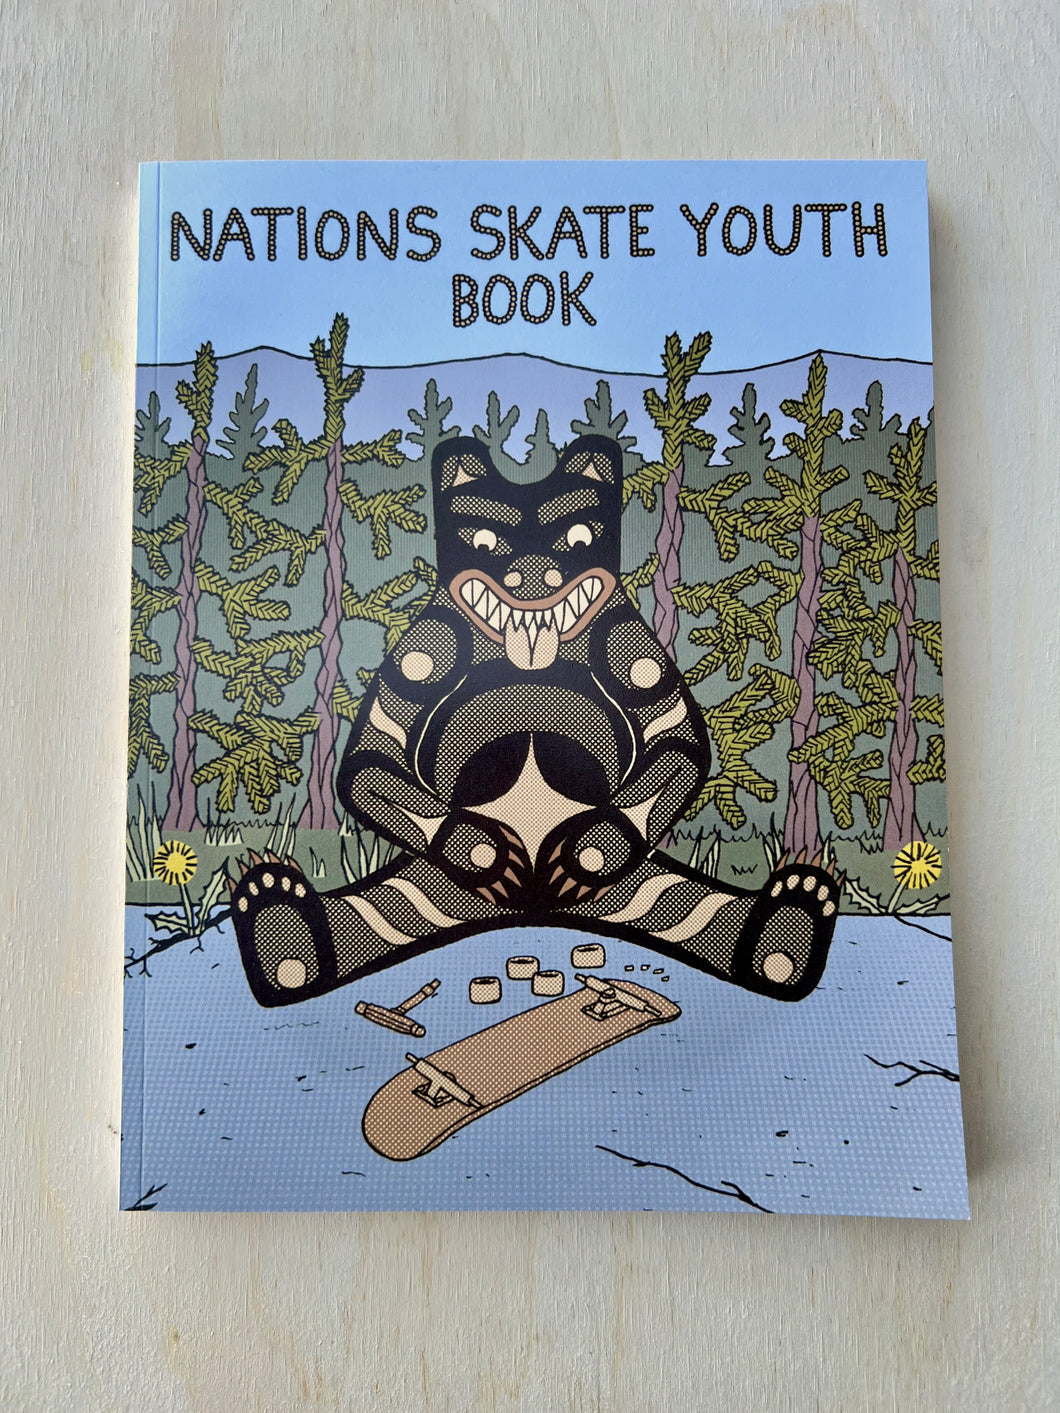 Nations Skate Youth Book